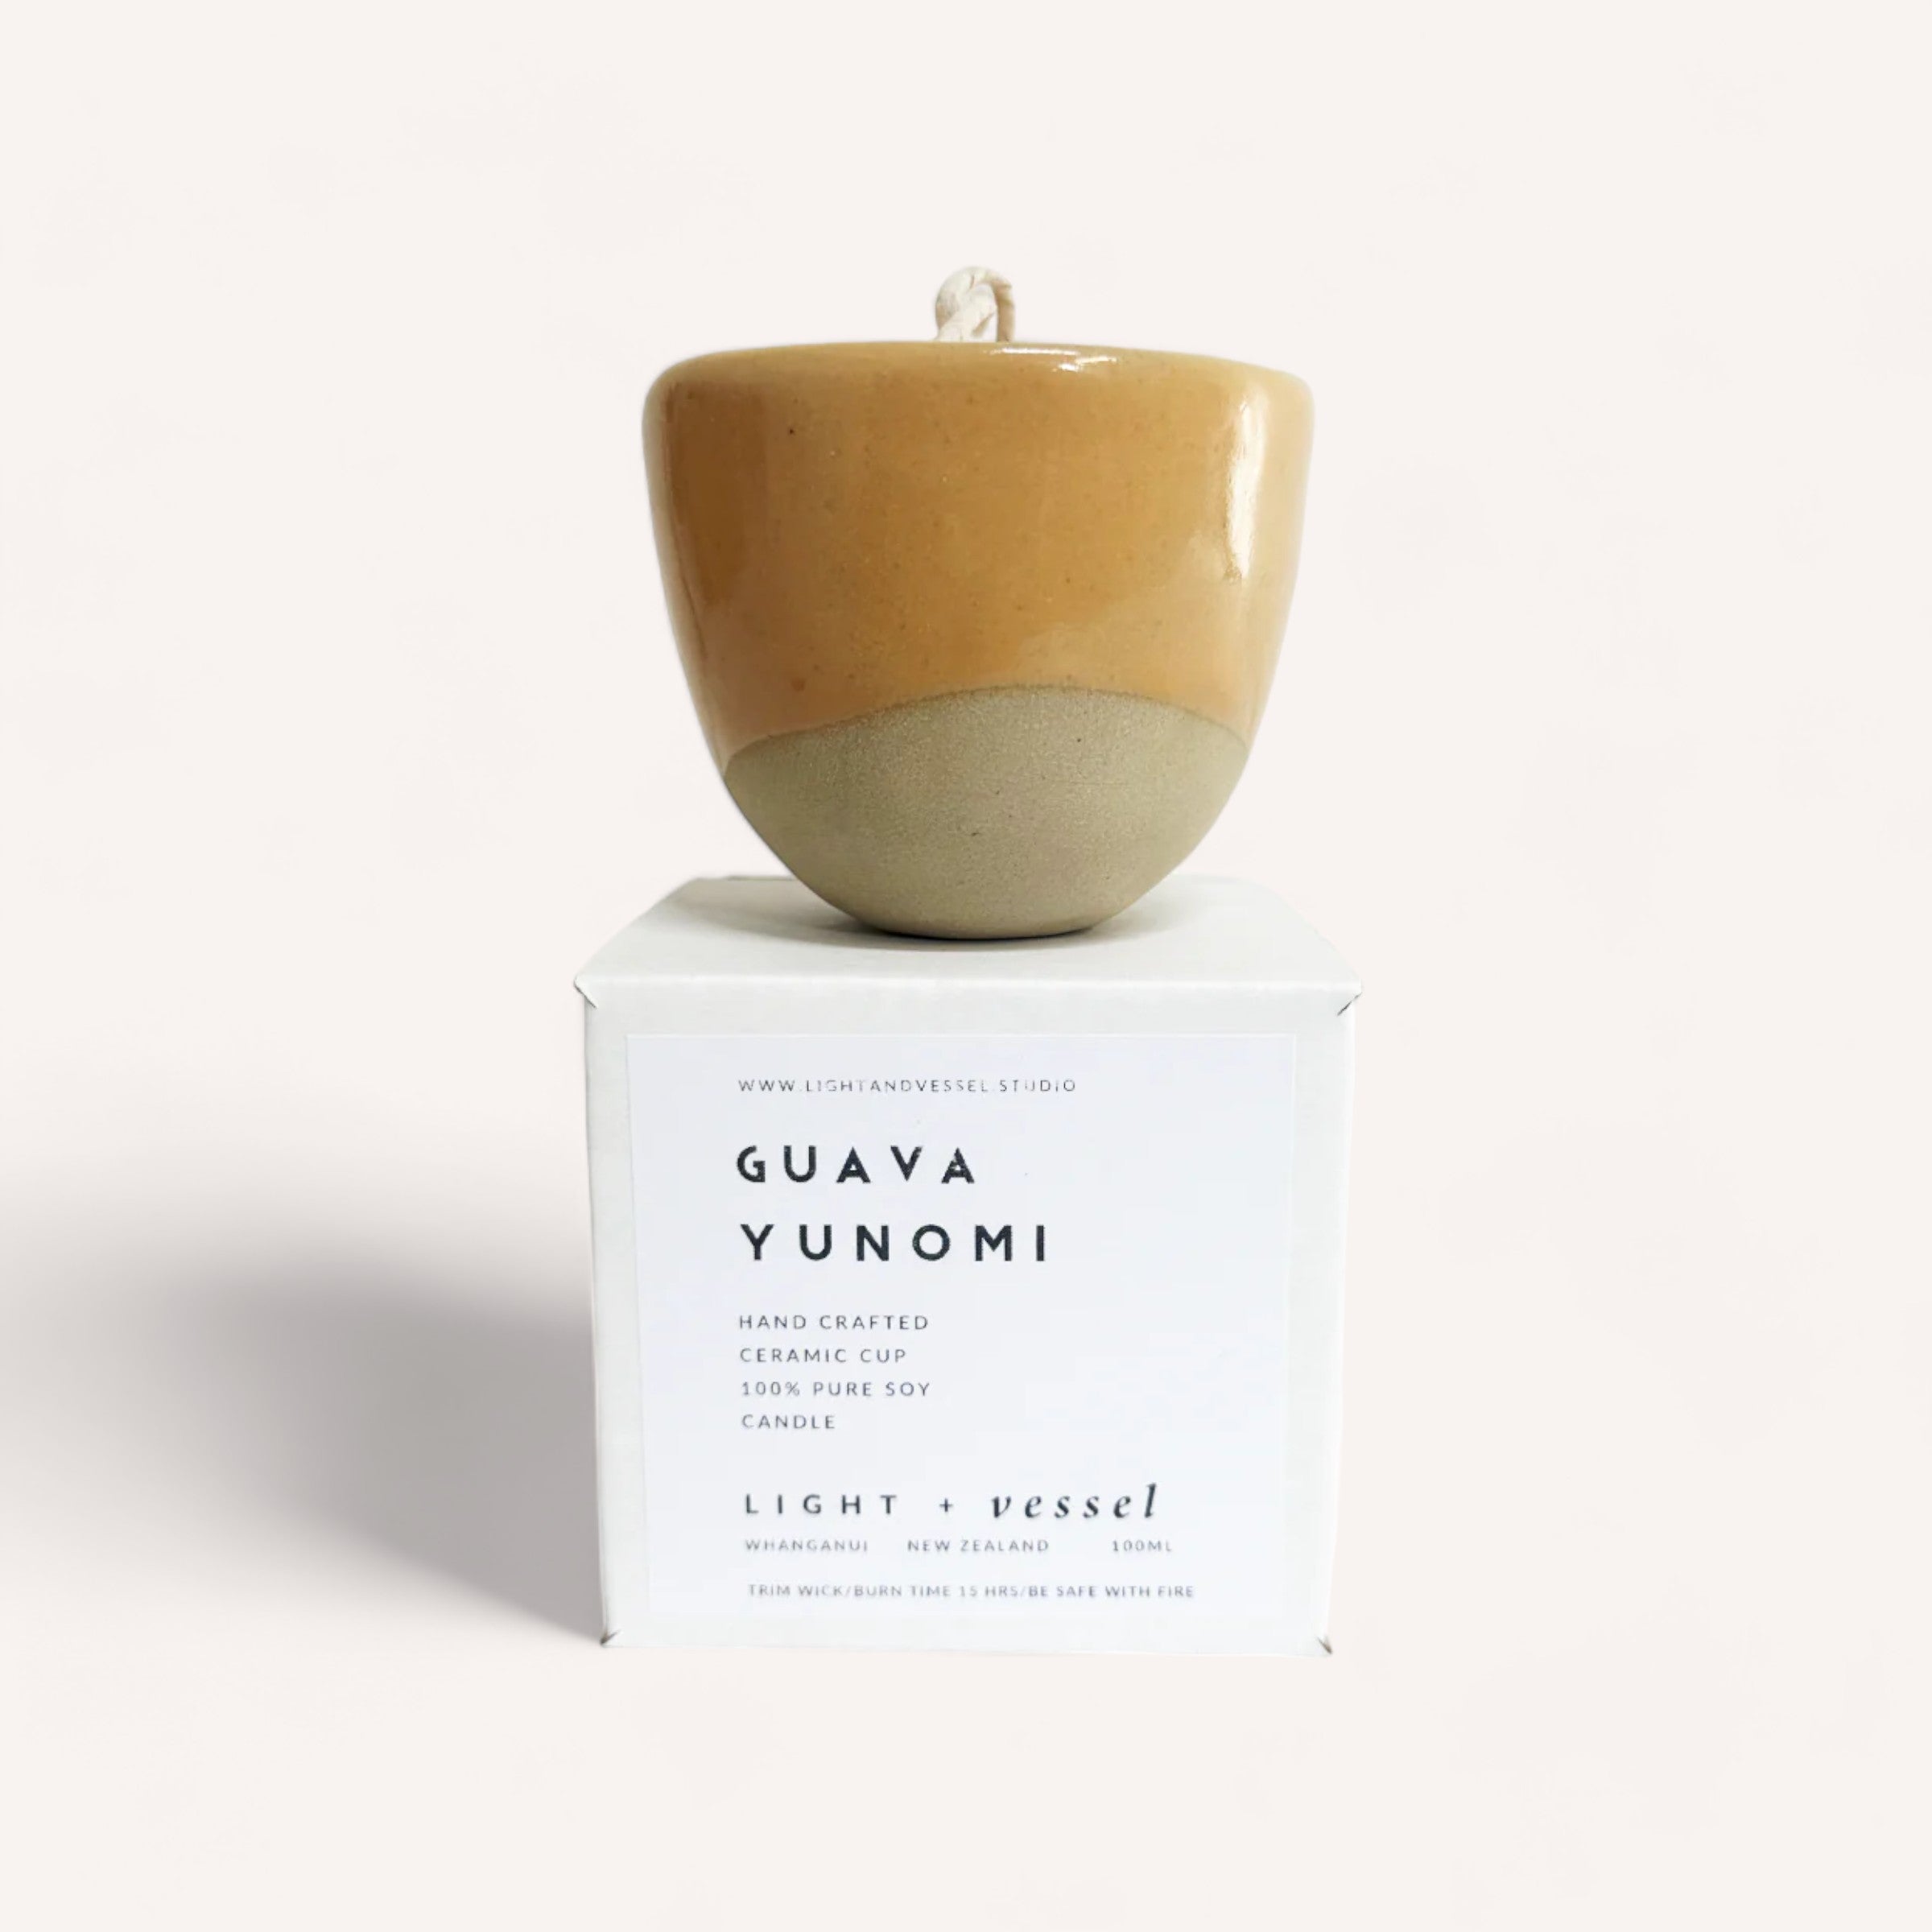 A handcrafted ceramic cup labeled guava yunomi by Light + Vessel, presented on a clean white background, accompanied by a Guava Candle by Light + Vessel infused with natural fragrance oils.